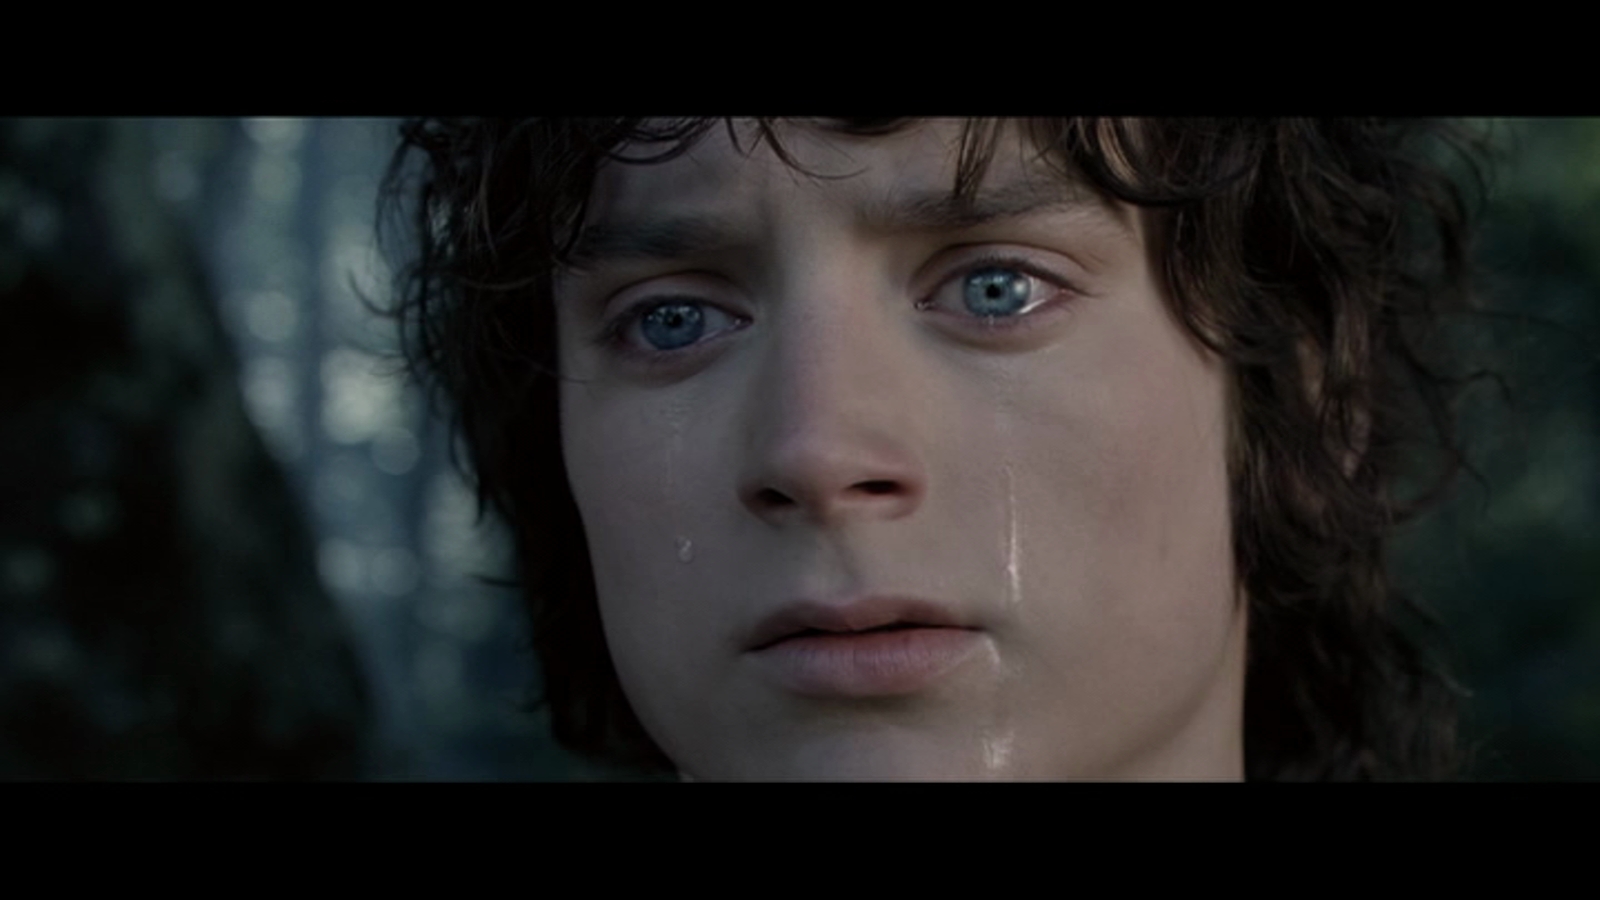 free instal The Lord of the Rings: The Fellowship…